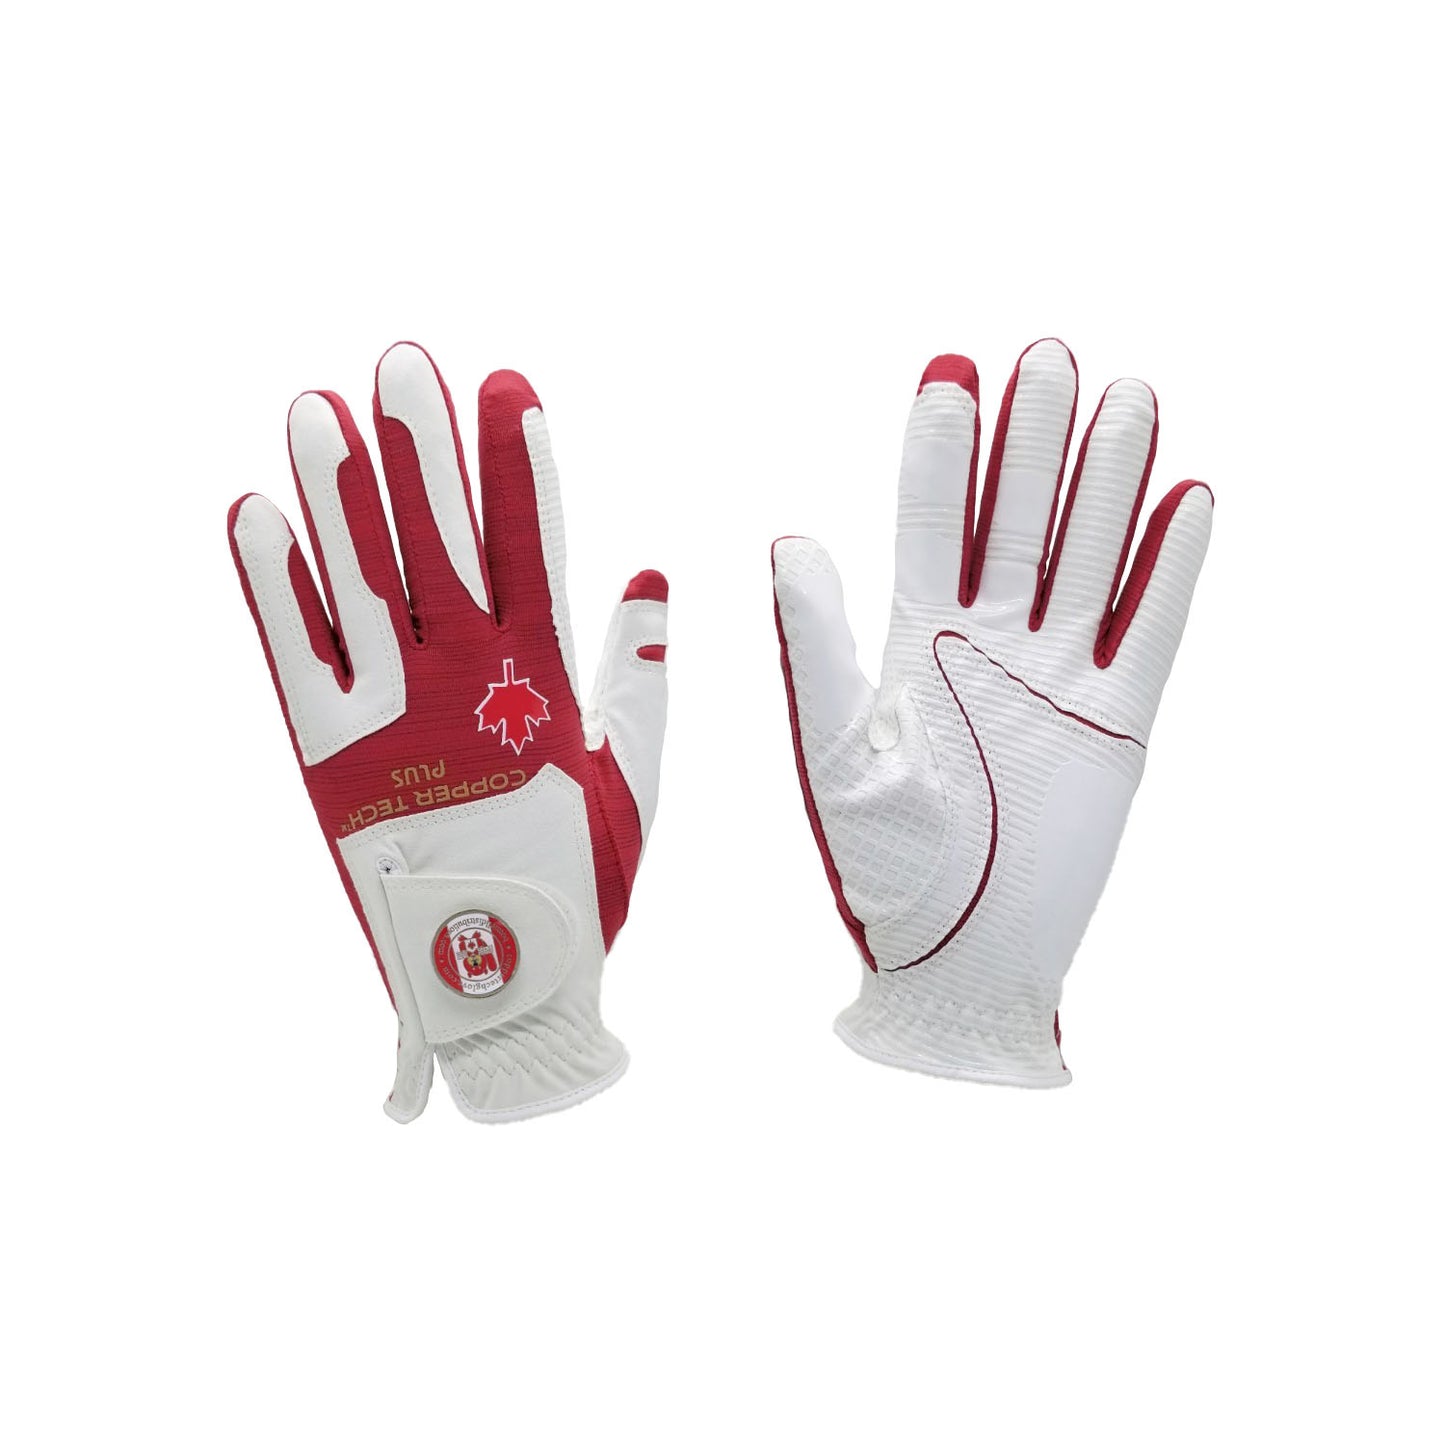 Copper Tech Plus Women Canada Theme Patriotic Golf Gloves Worn on Right Hand for Left Handed